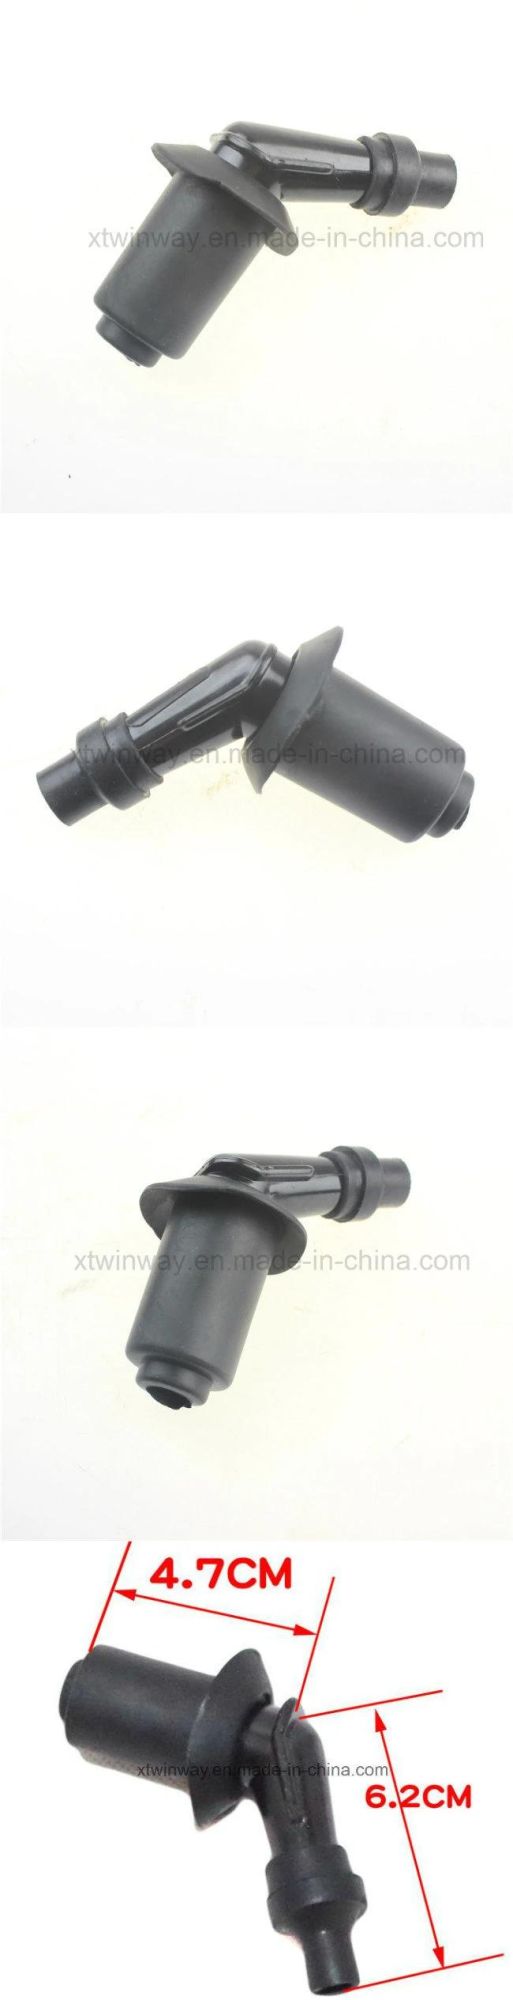 Gy6-125 Motorcycle Spark Plug Cap Motorcycle Parts